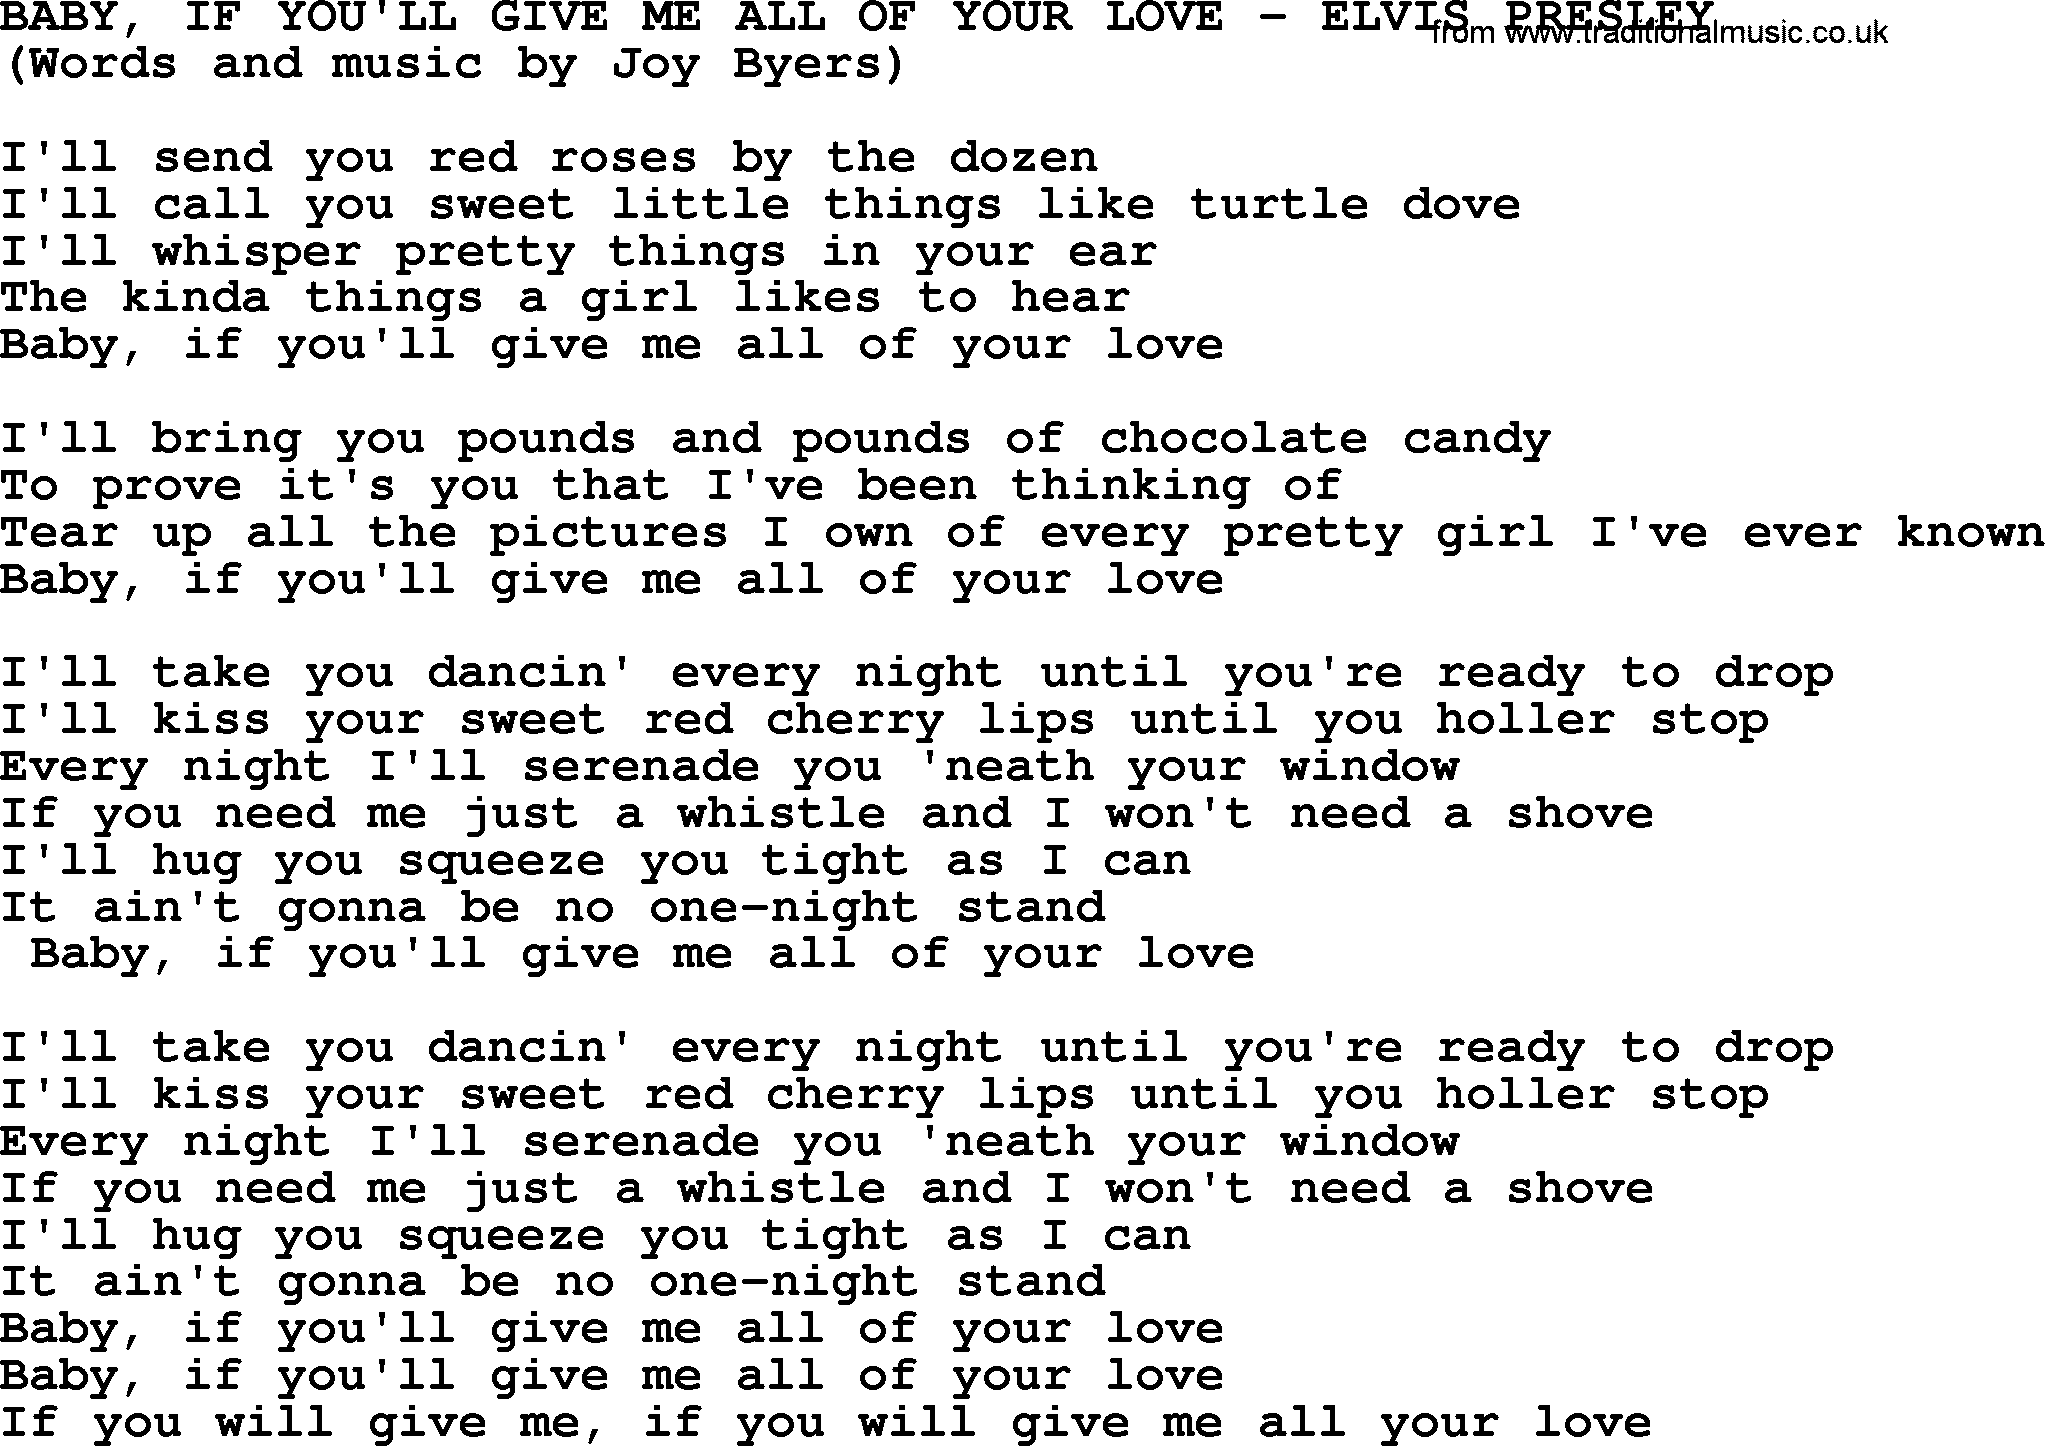 Elvis Presley song: Baby, If You'll Give Me All Of Your Love lyrics